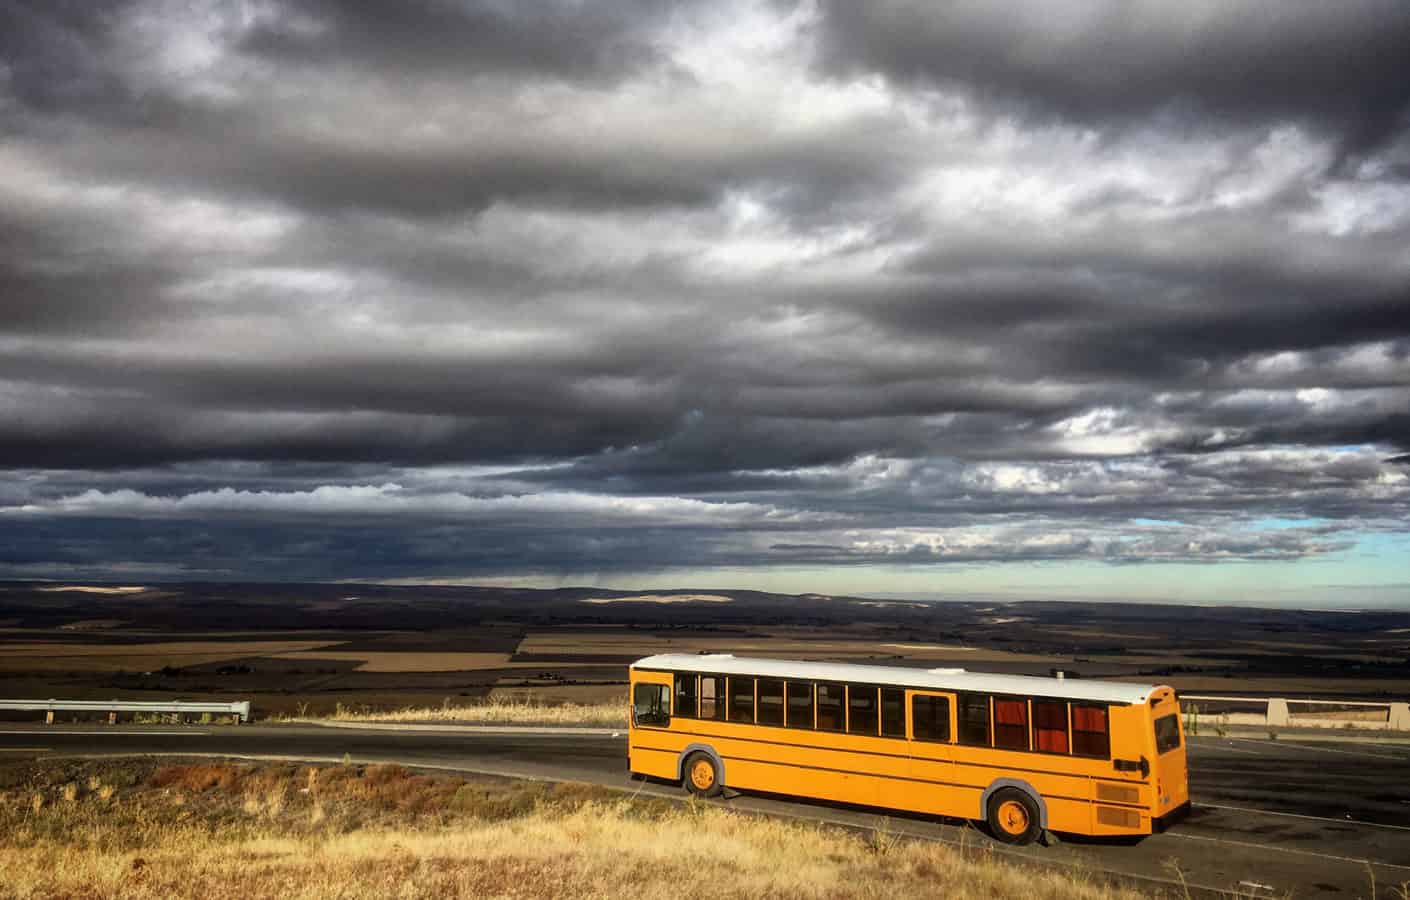 school bus RV under dark clouds - feature image for How To Turn A Bus Into An RV